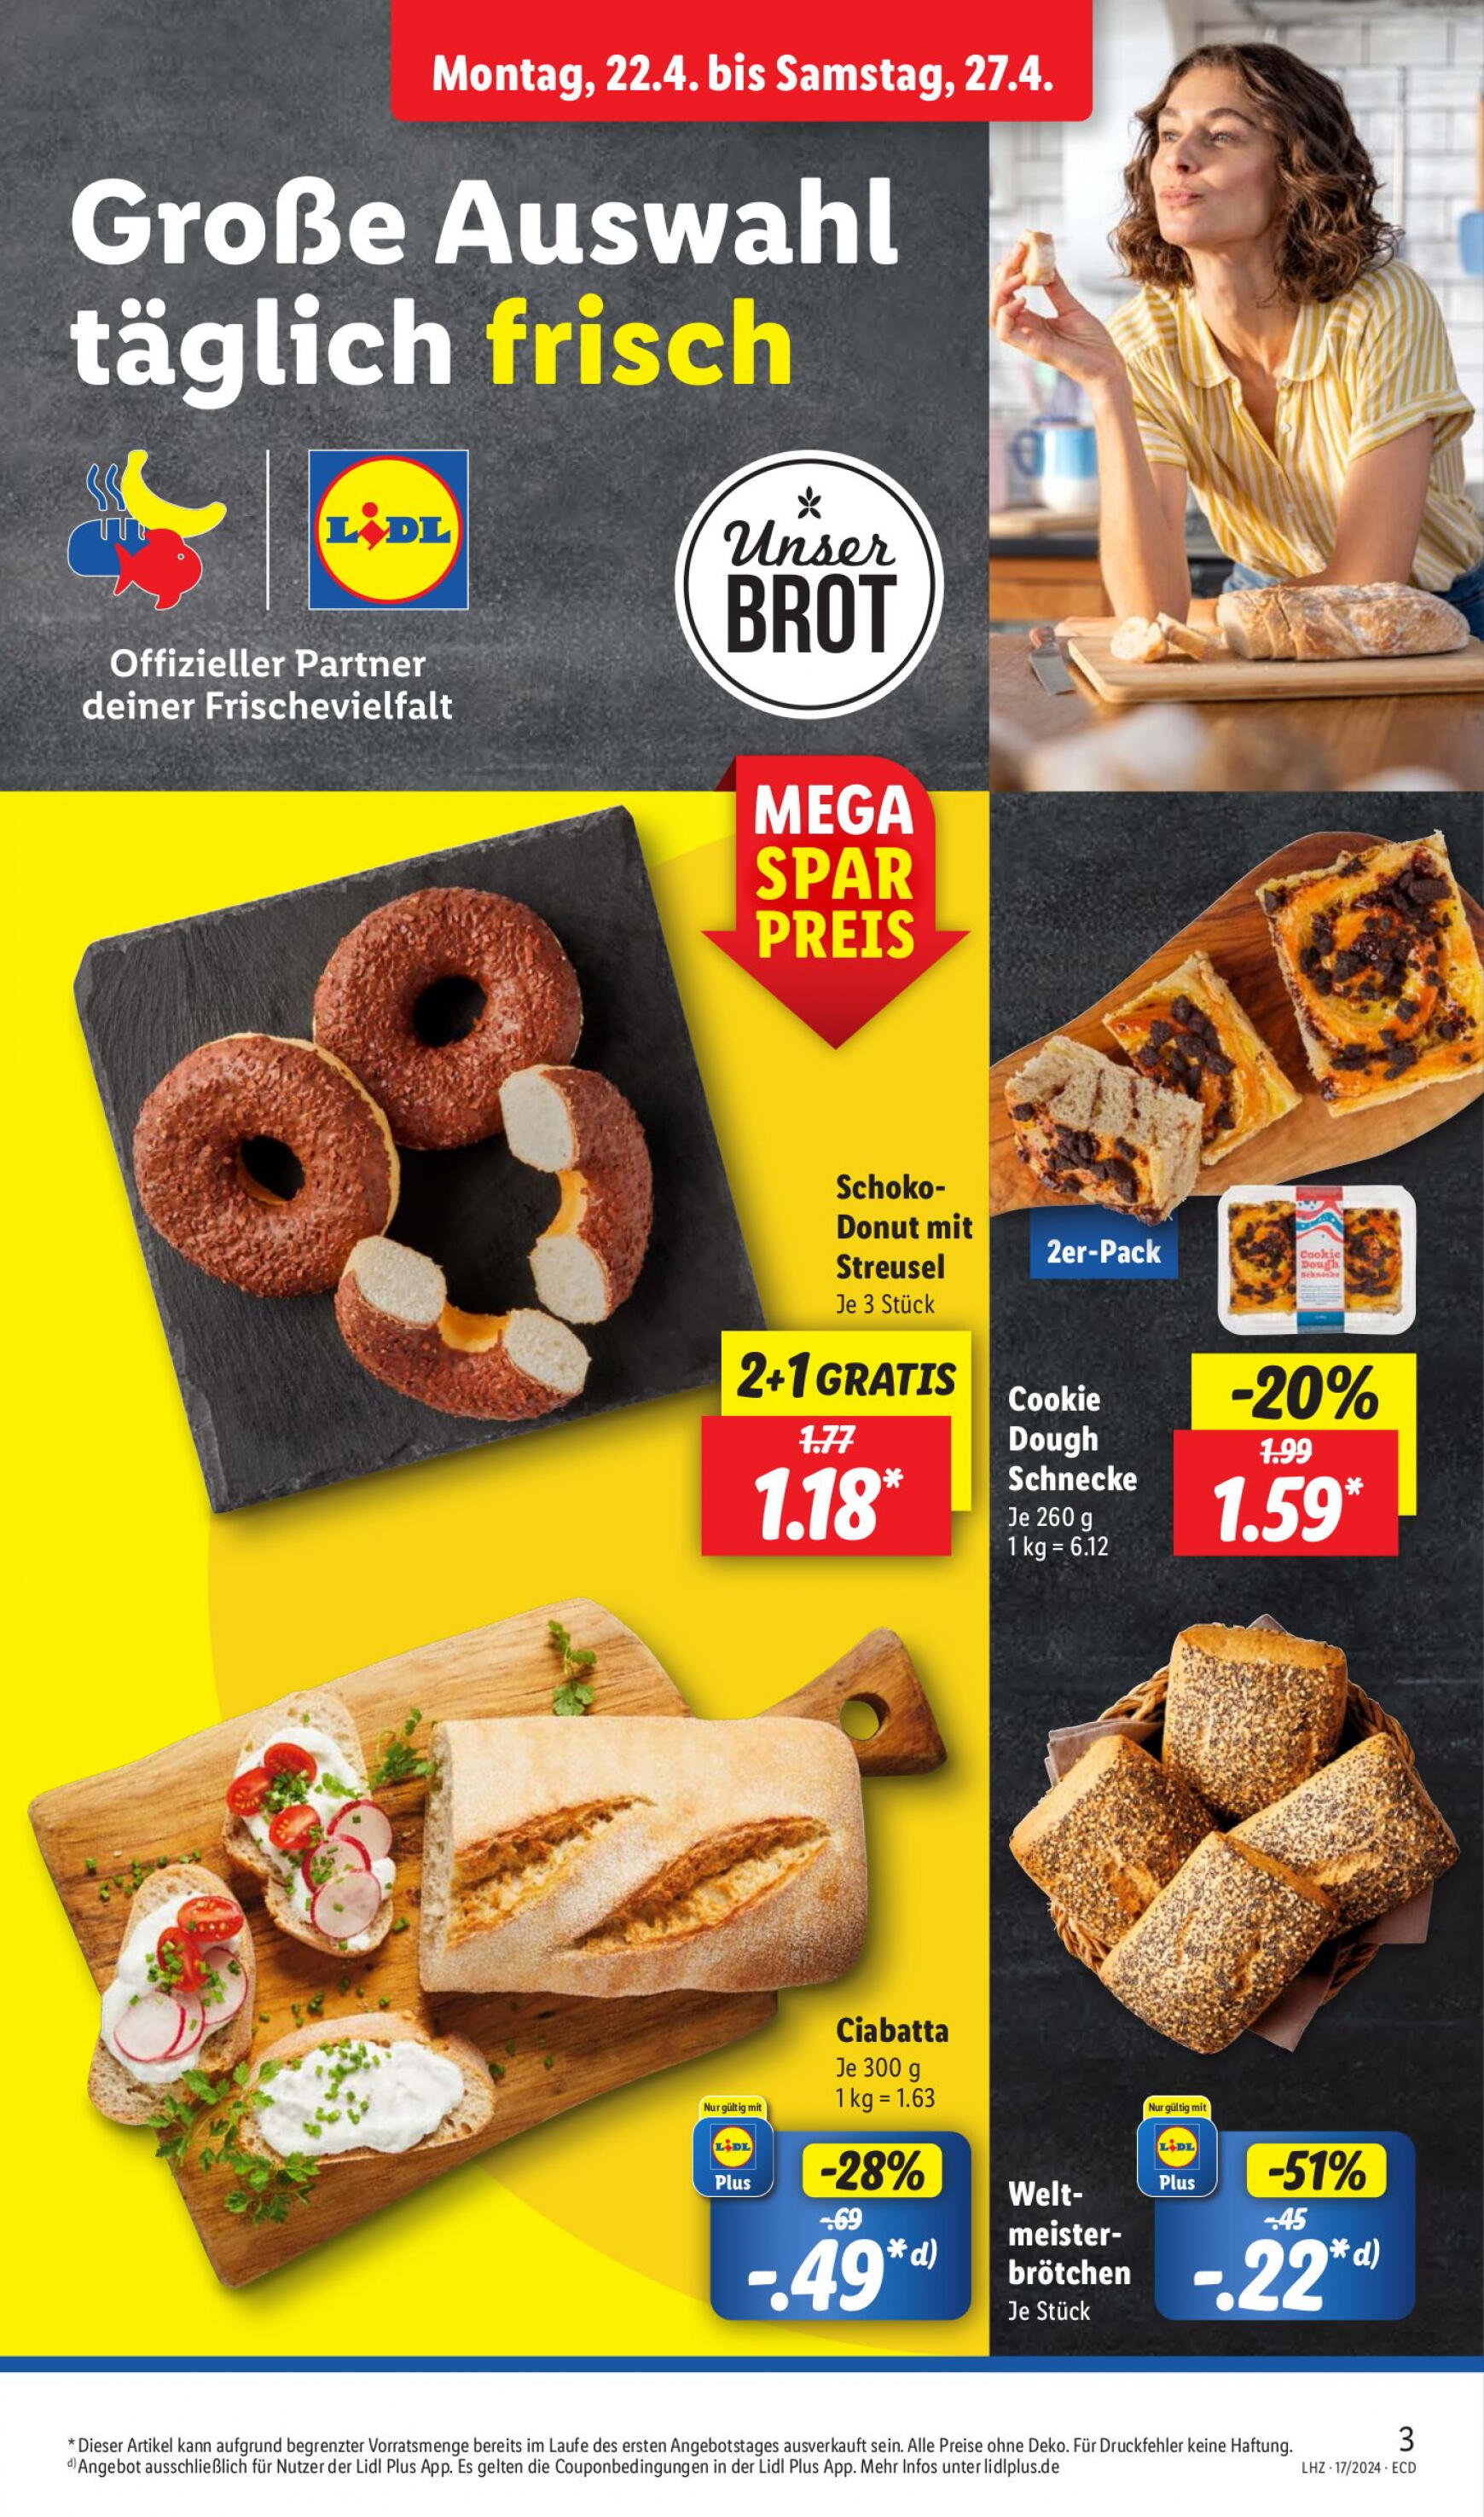 lidl - Flyer Lidl aktuell 22.04. - 27.04. - page: 3